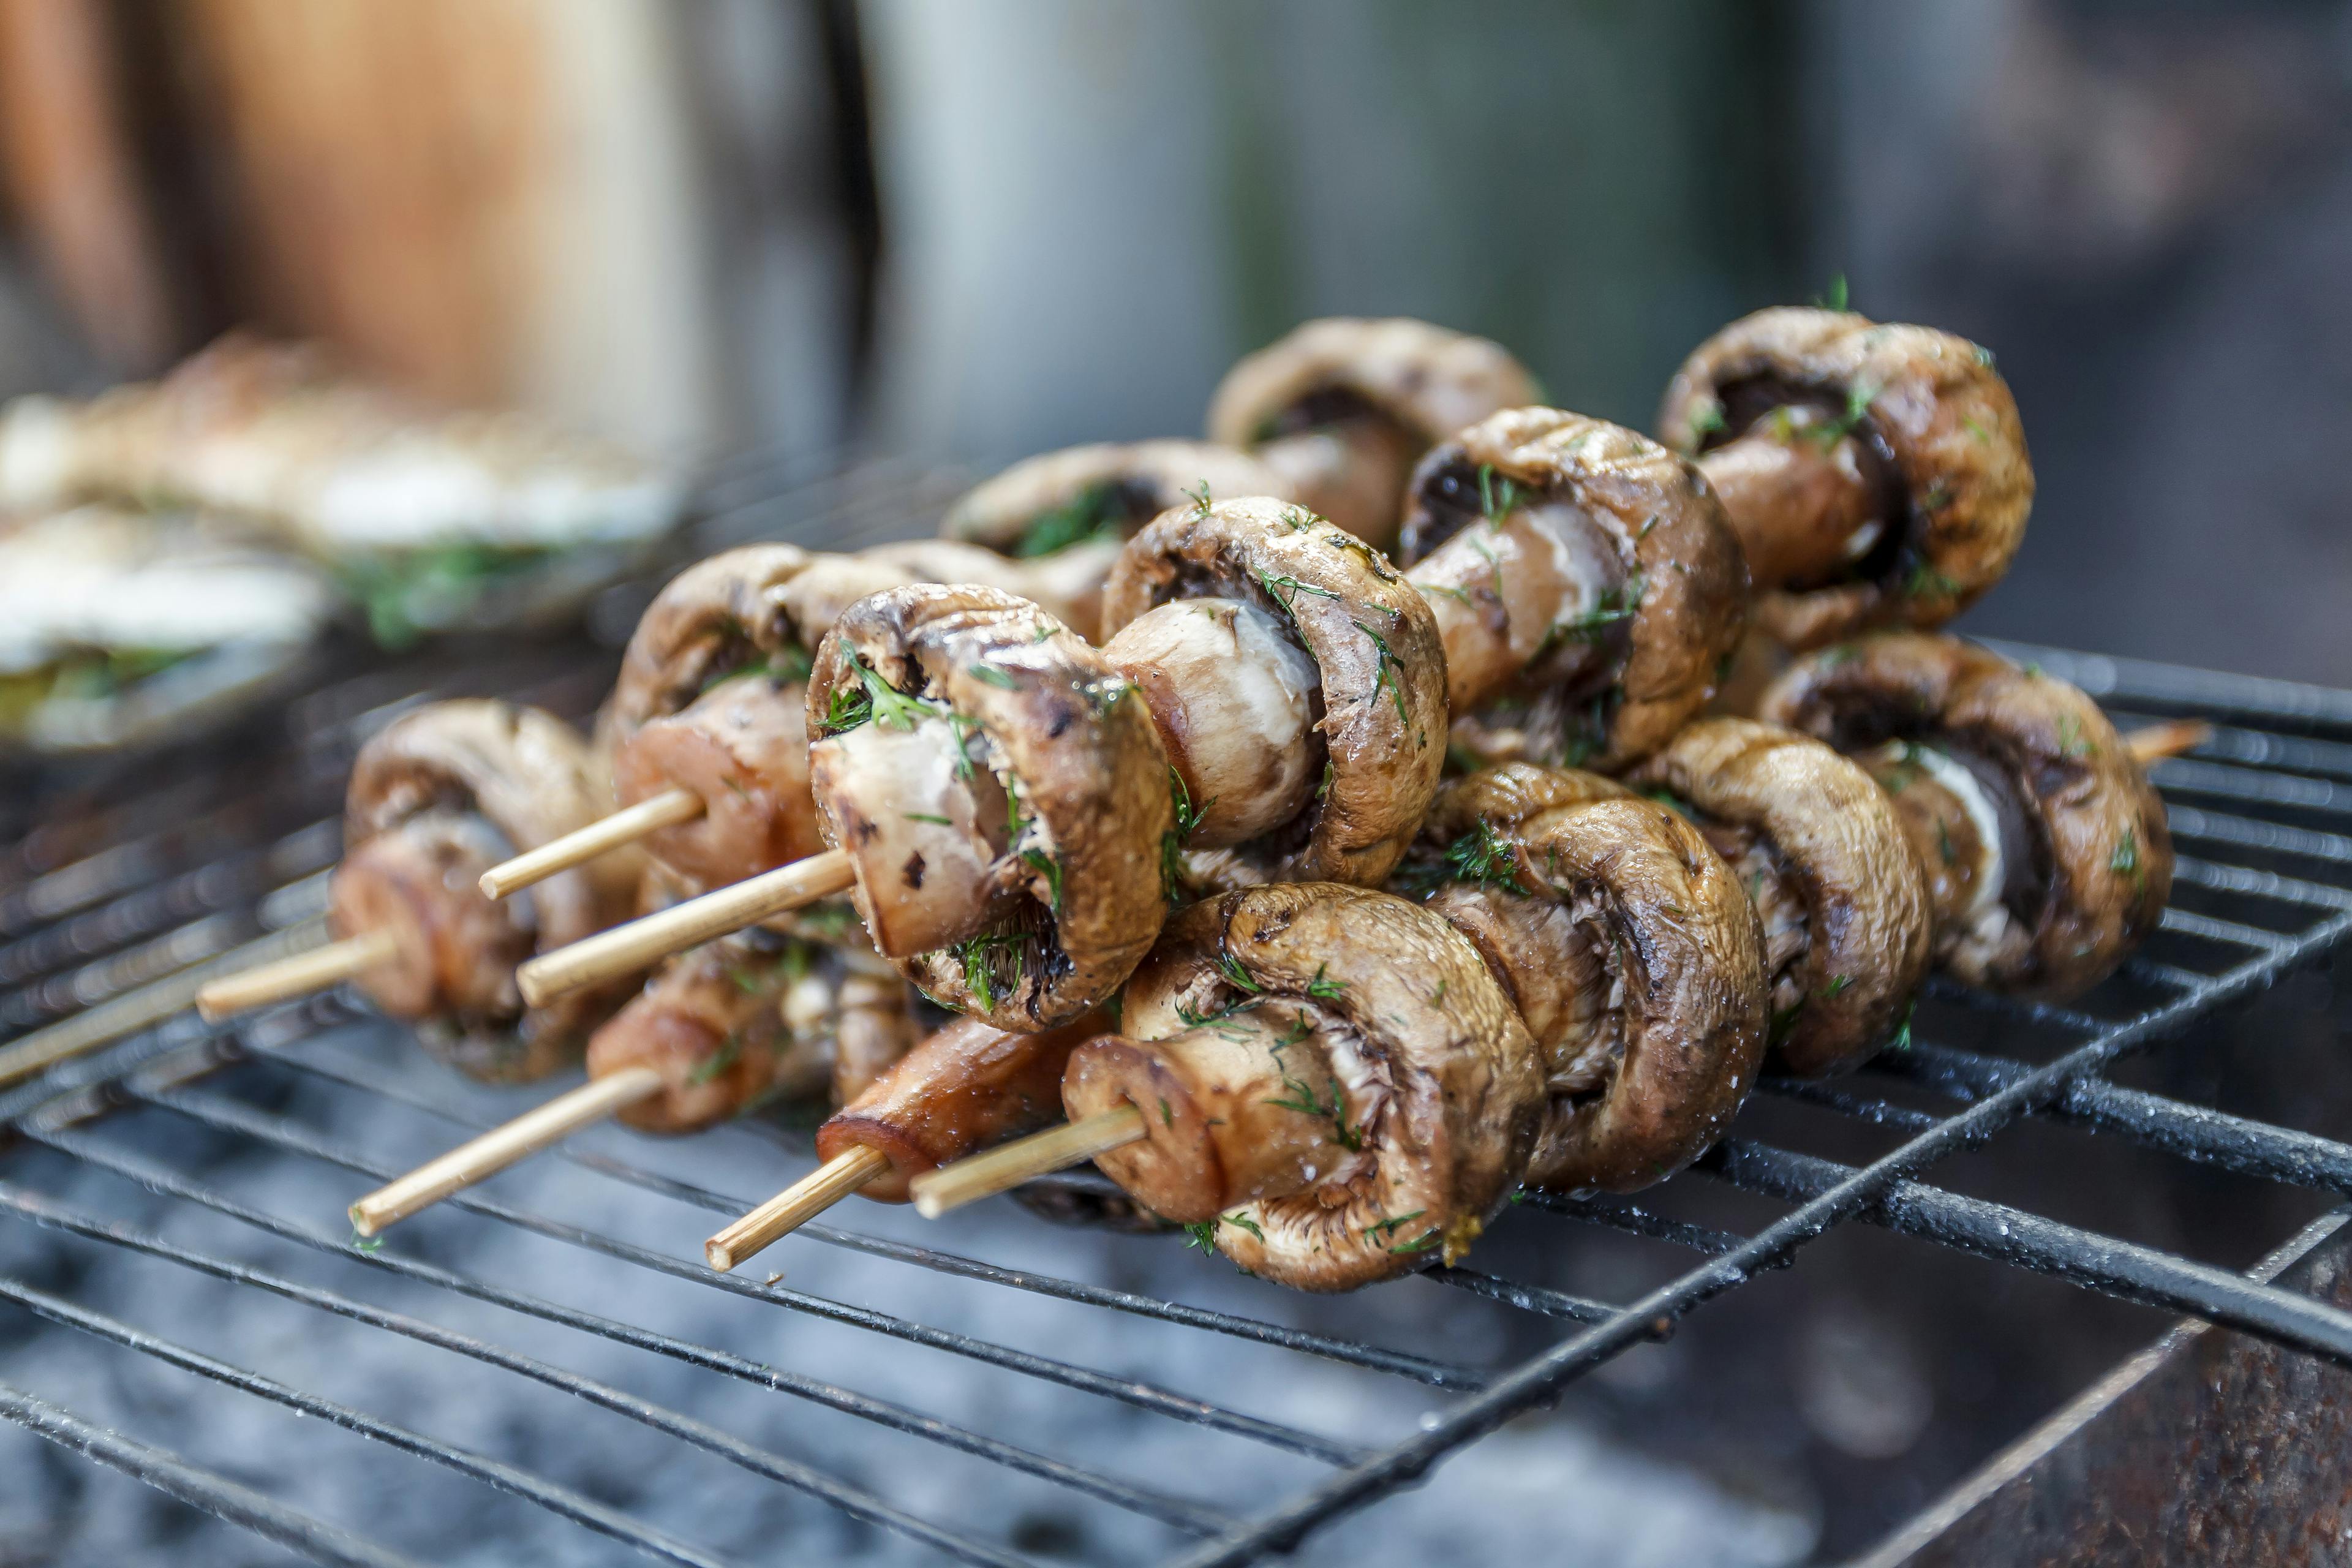 Grilled mushrooms on skewers cooked in a brazier, close-up, retro effect